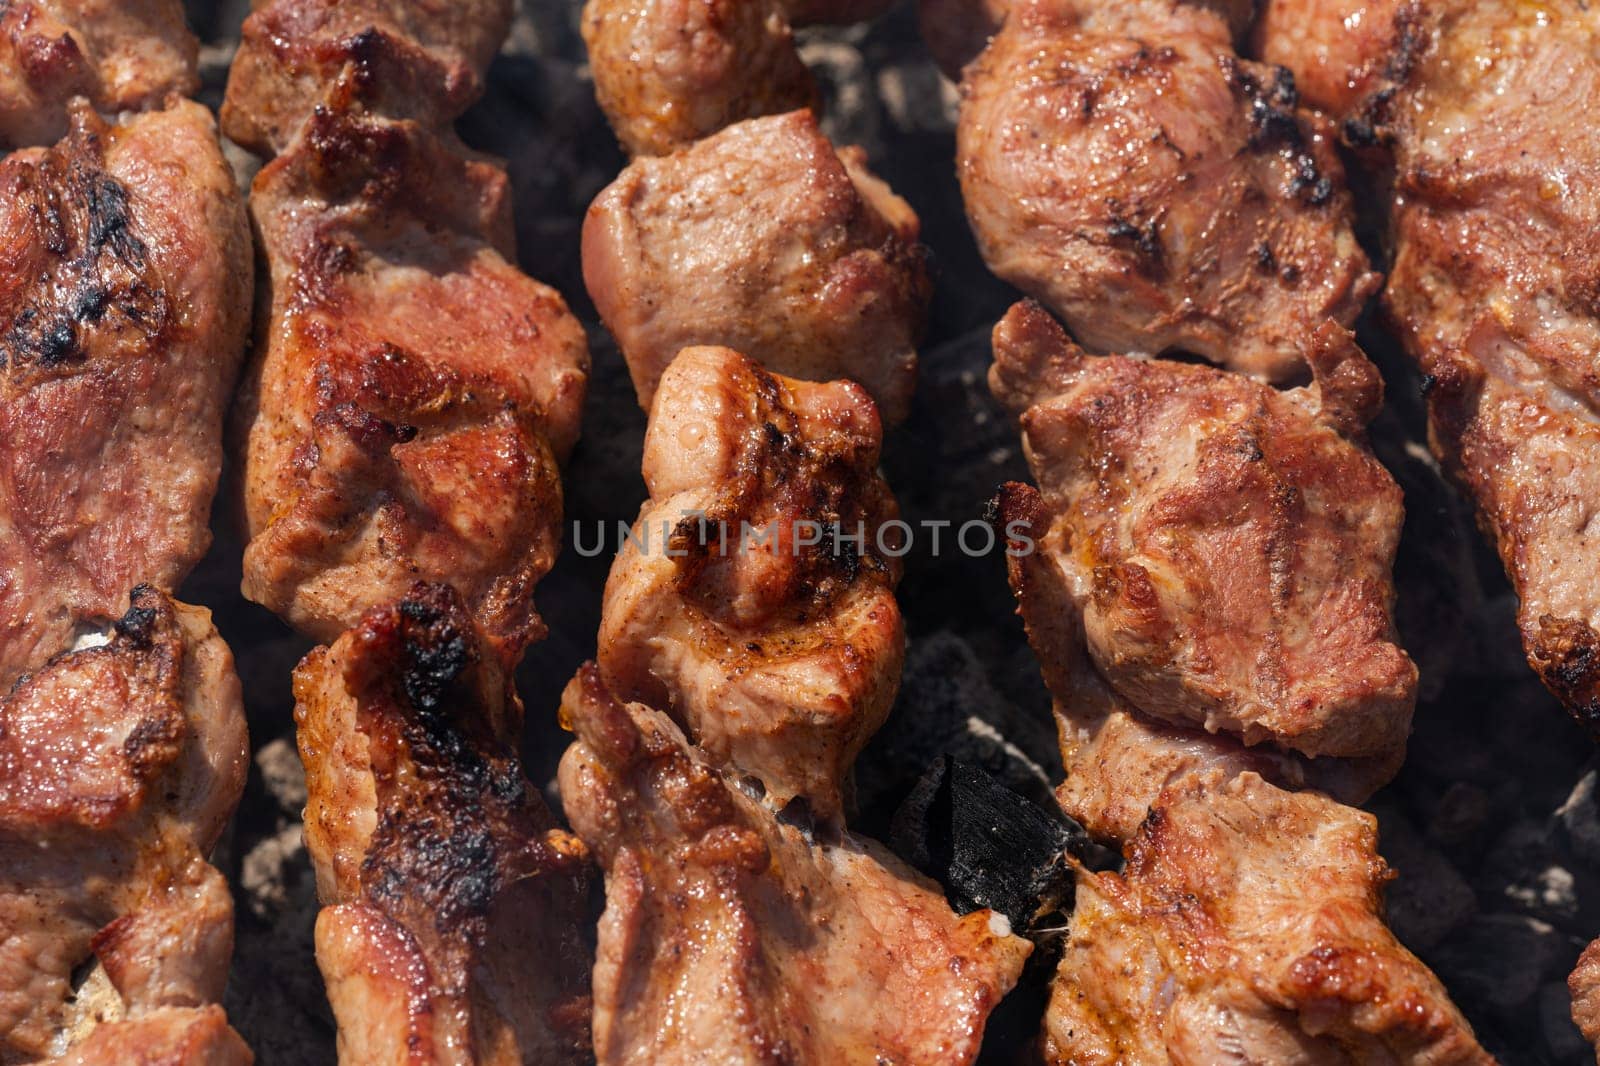 Tasty juicy pork barbecue cooking on metal skewers on charcoal outdoors grill with fragrant fire smoke. Close-up view, cooking during summer picnic. Selective focus on pieces of delicious roast meat.